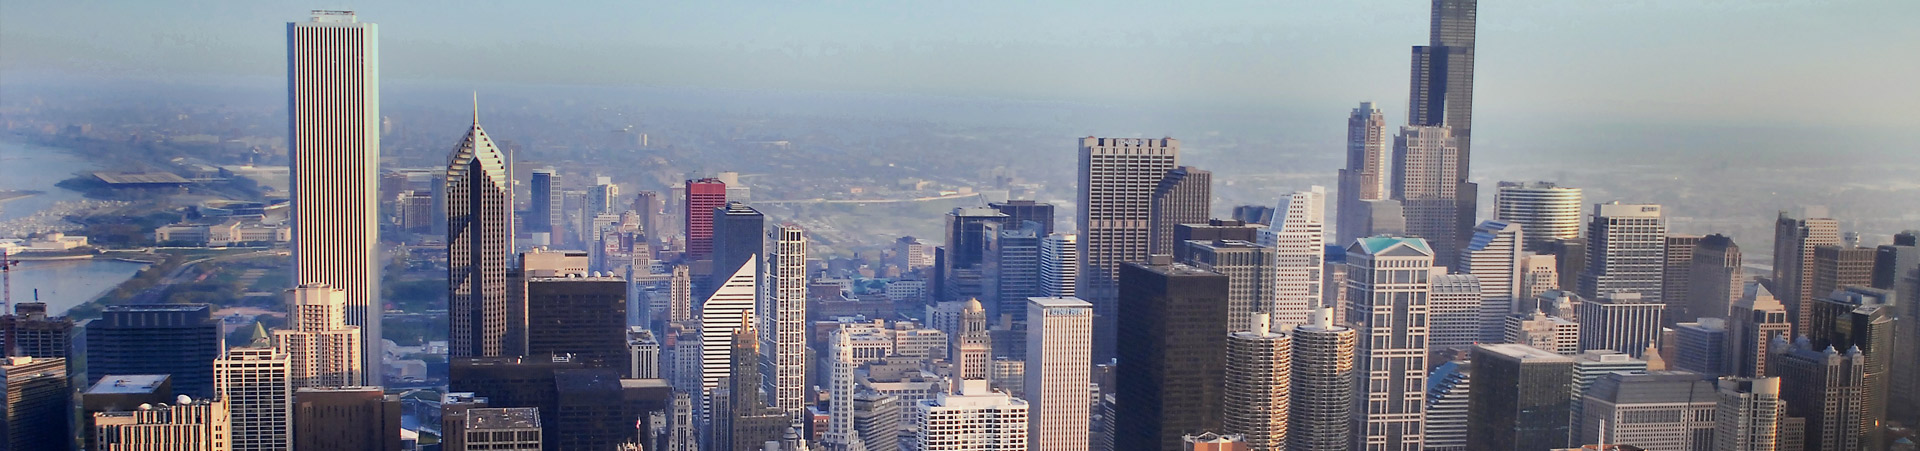 Chicago Helicopter Tours